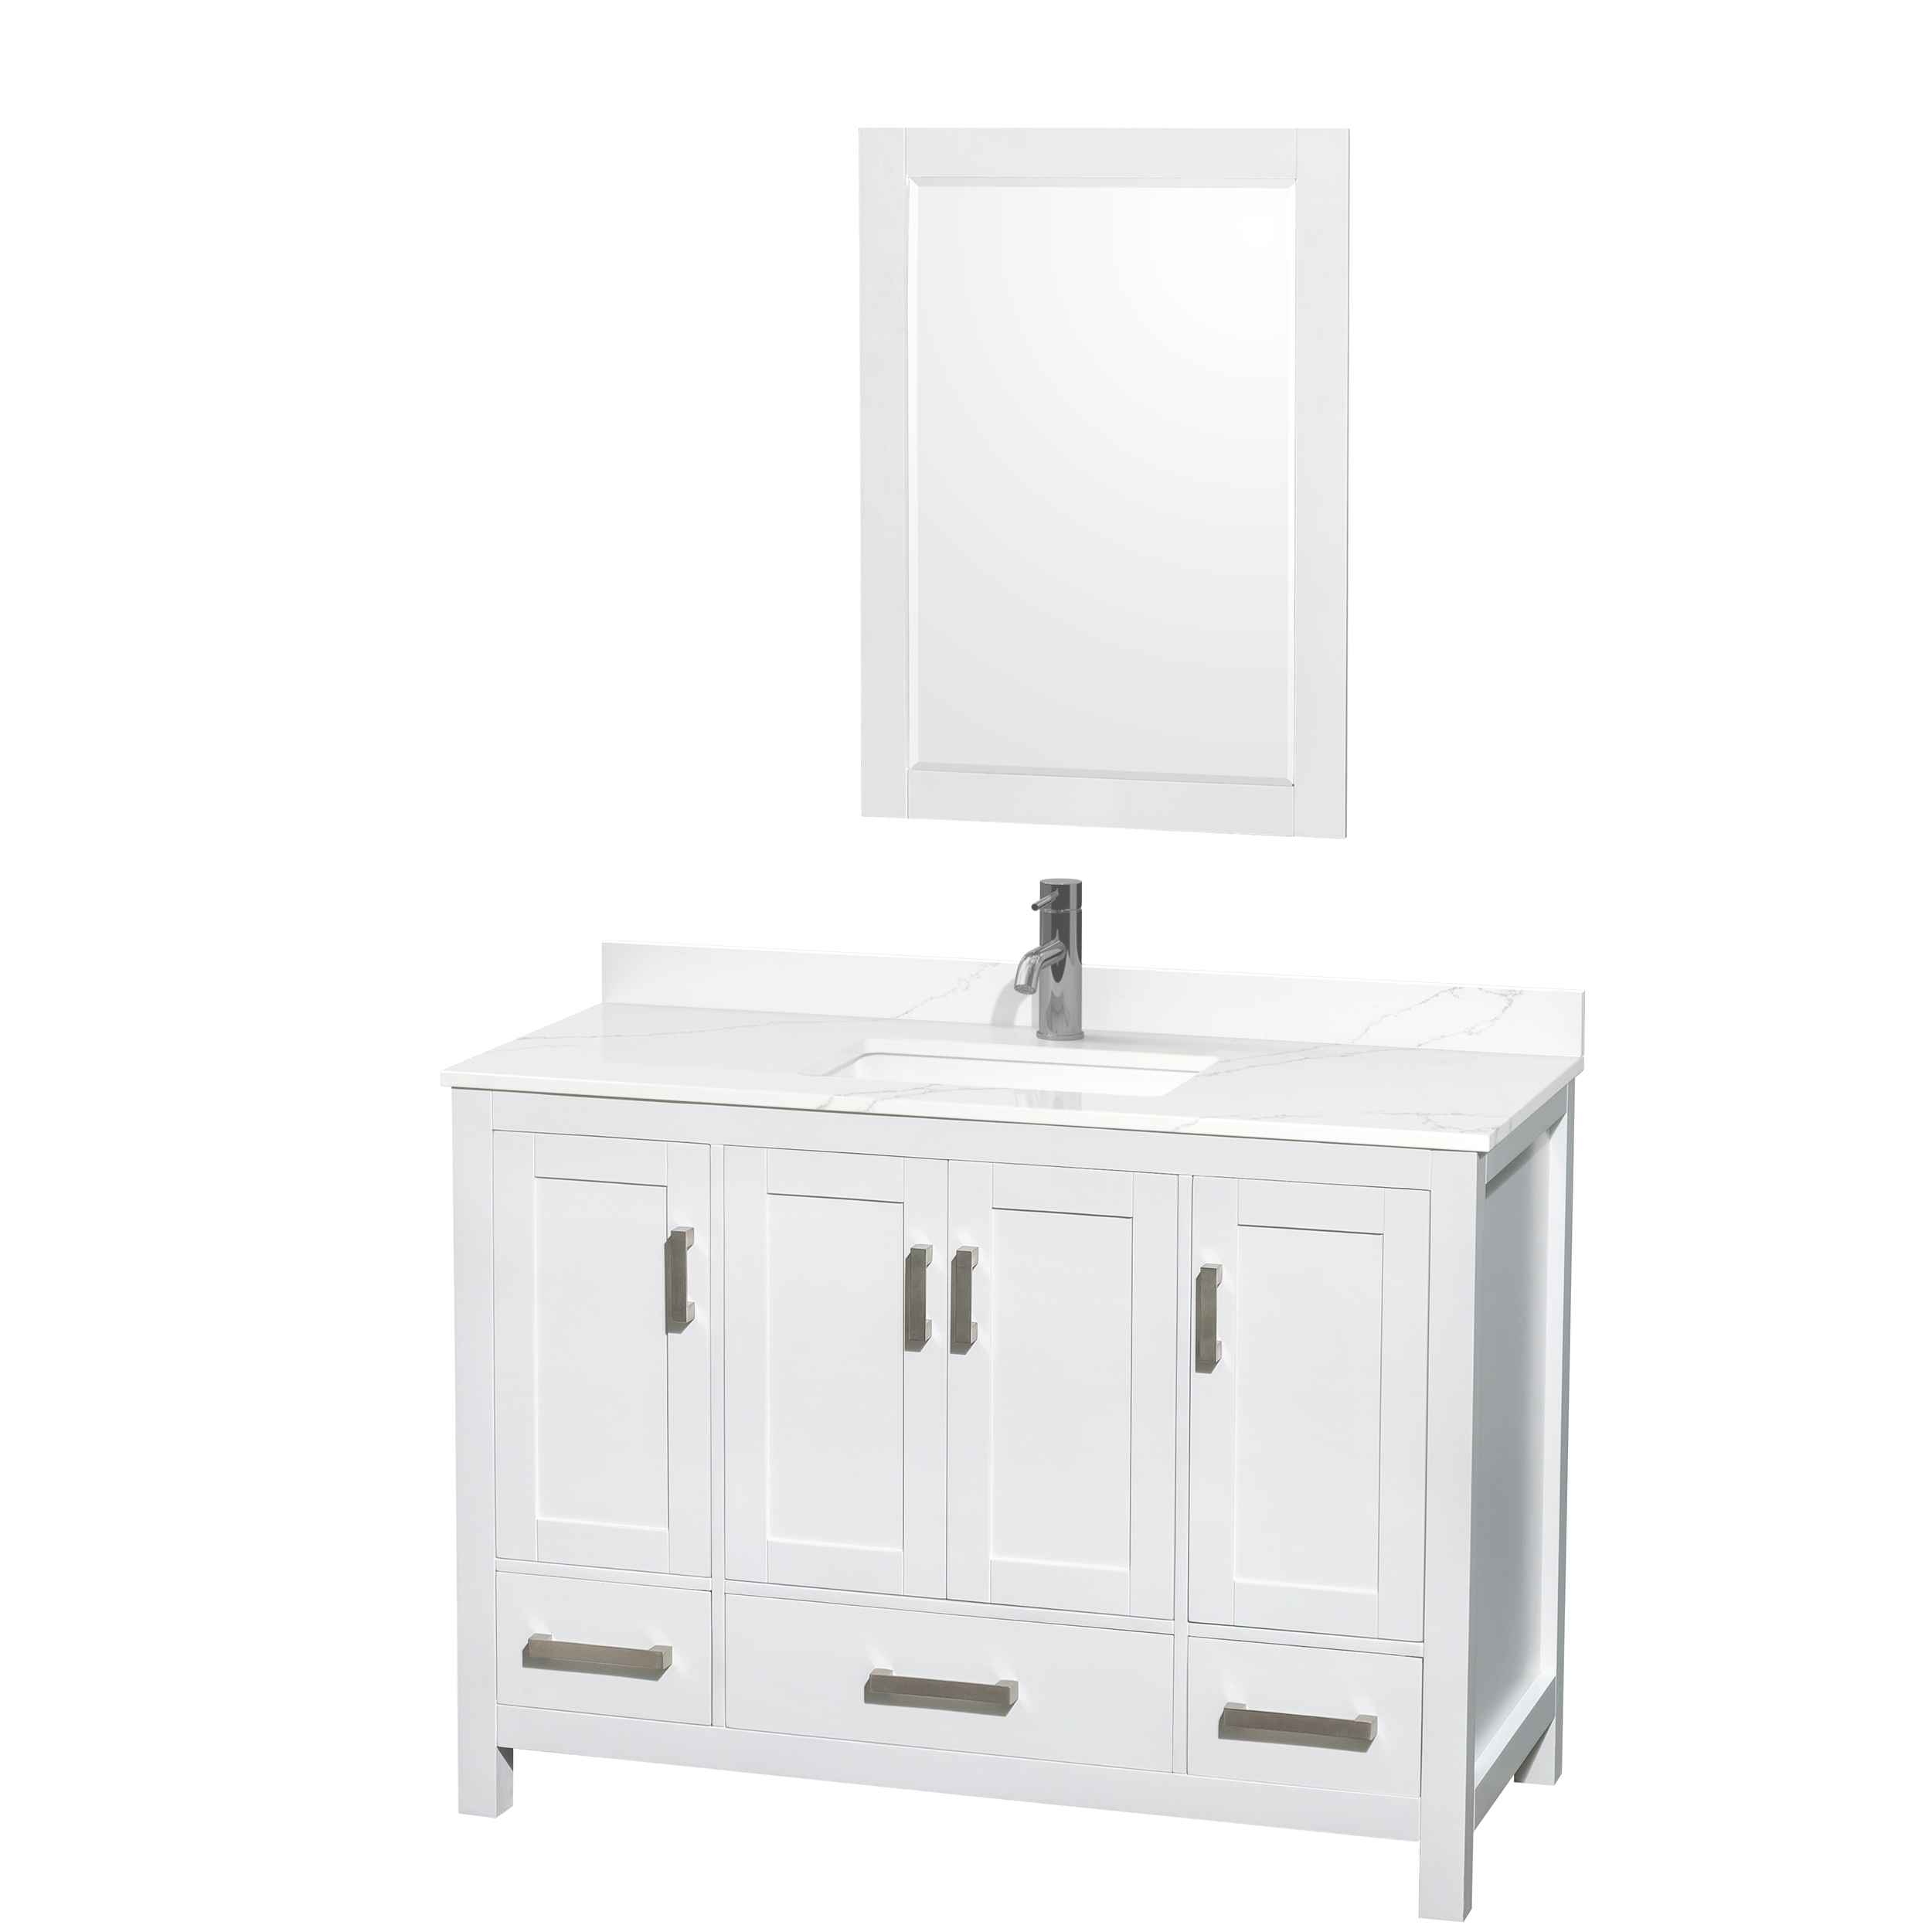 sheffield 48" single bathroom vanity by wyndham collection - white